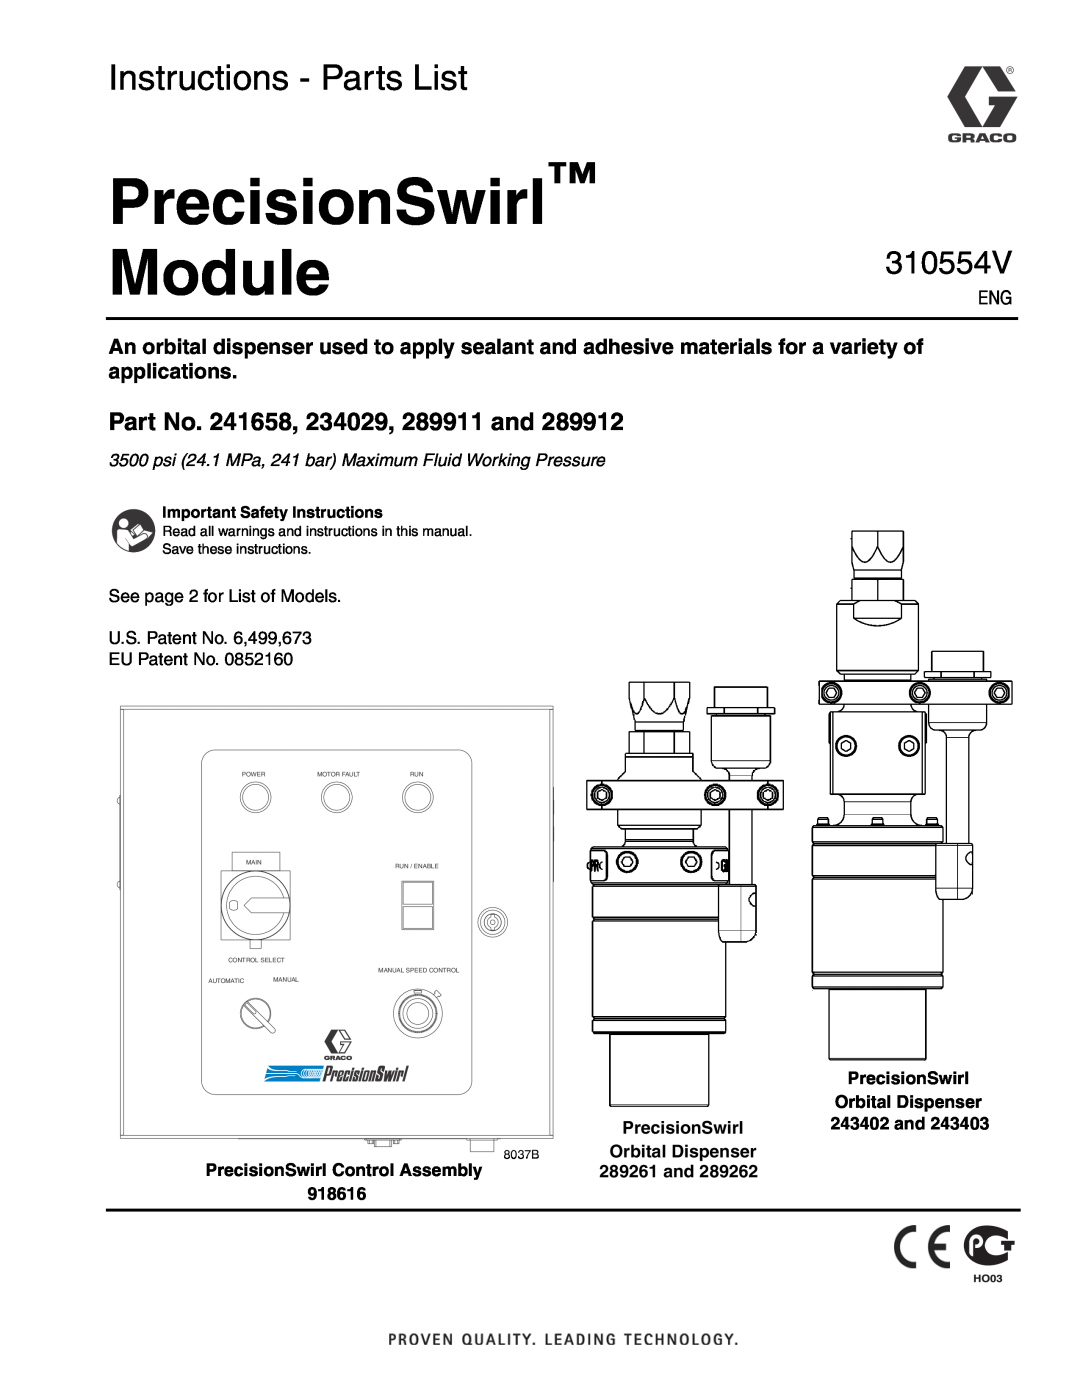 Graco 310554V important safety instructions PrecisionSwirl Module, Instructions - Parts List, 8037B 